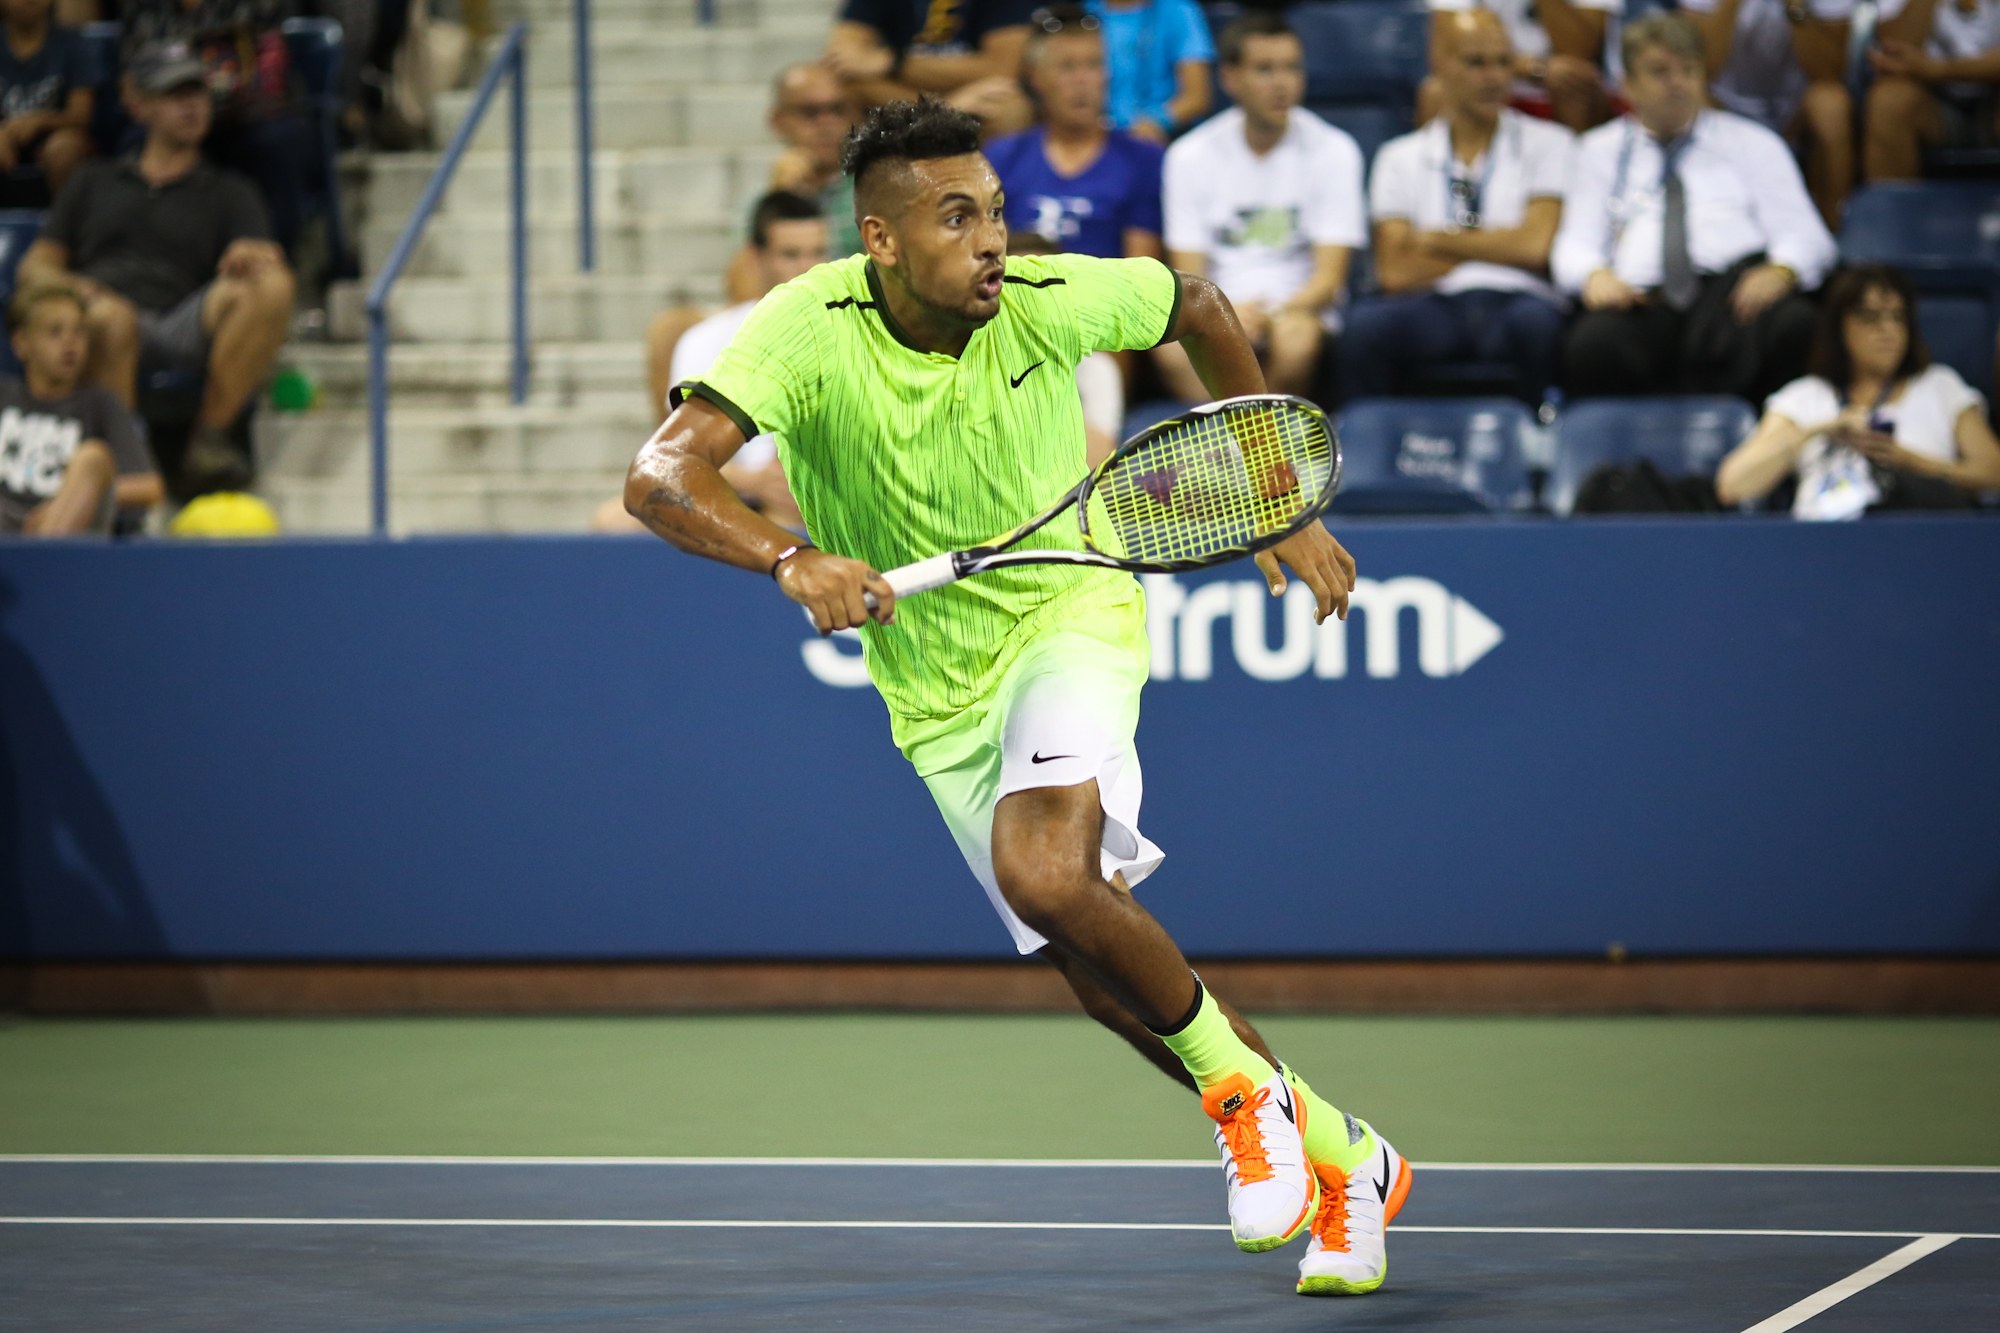 Nick Kyrgios, the perfect player for the old Grandstand, scores mostly